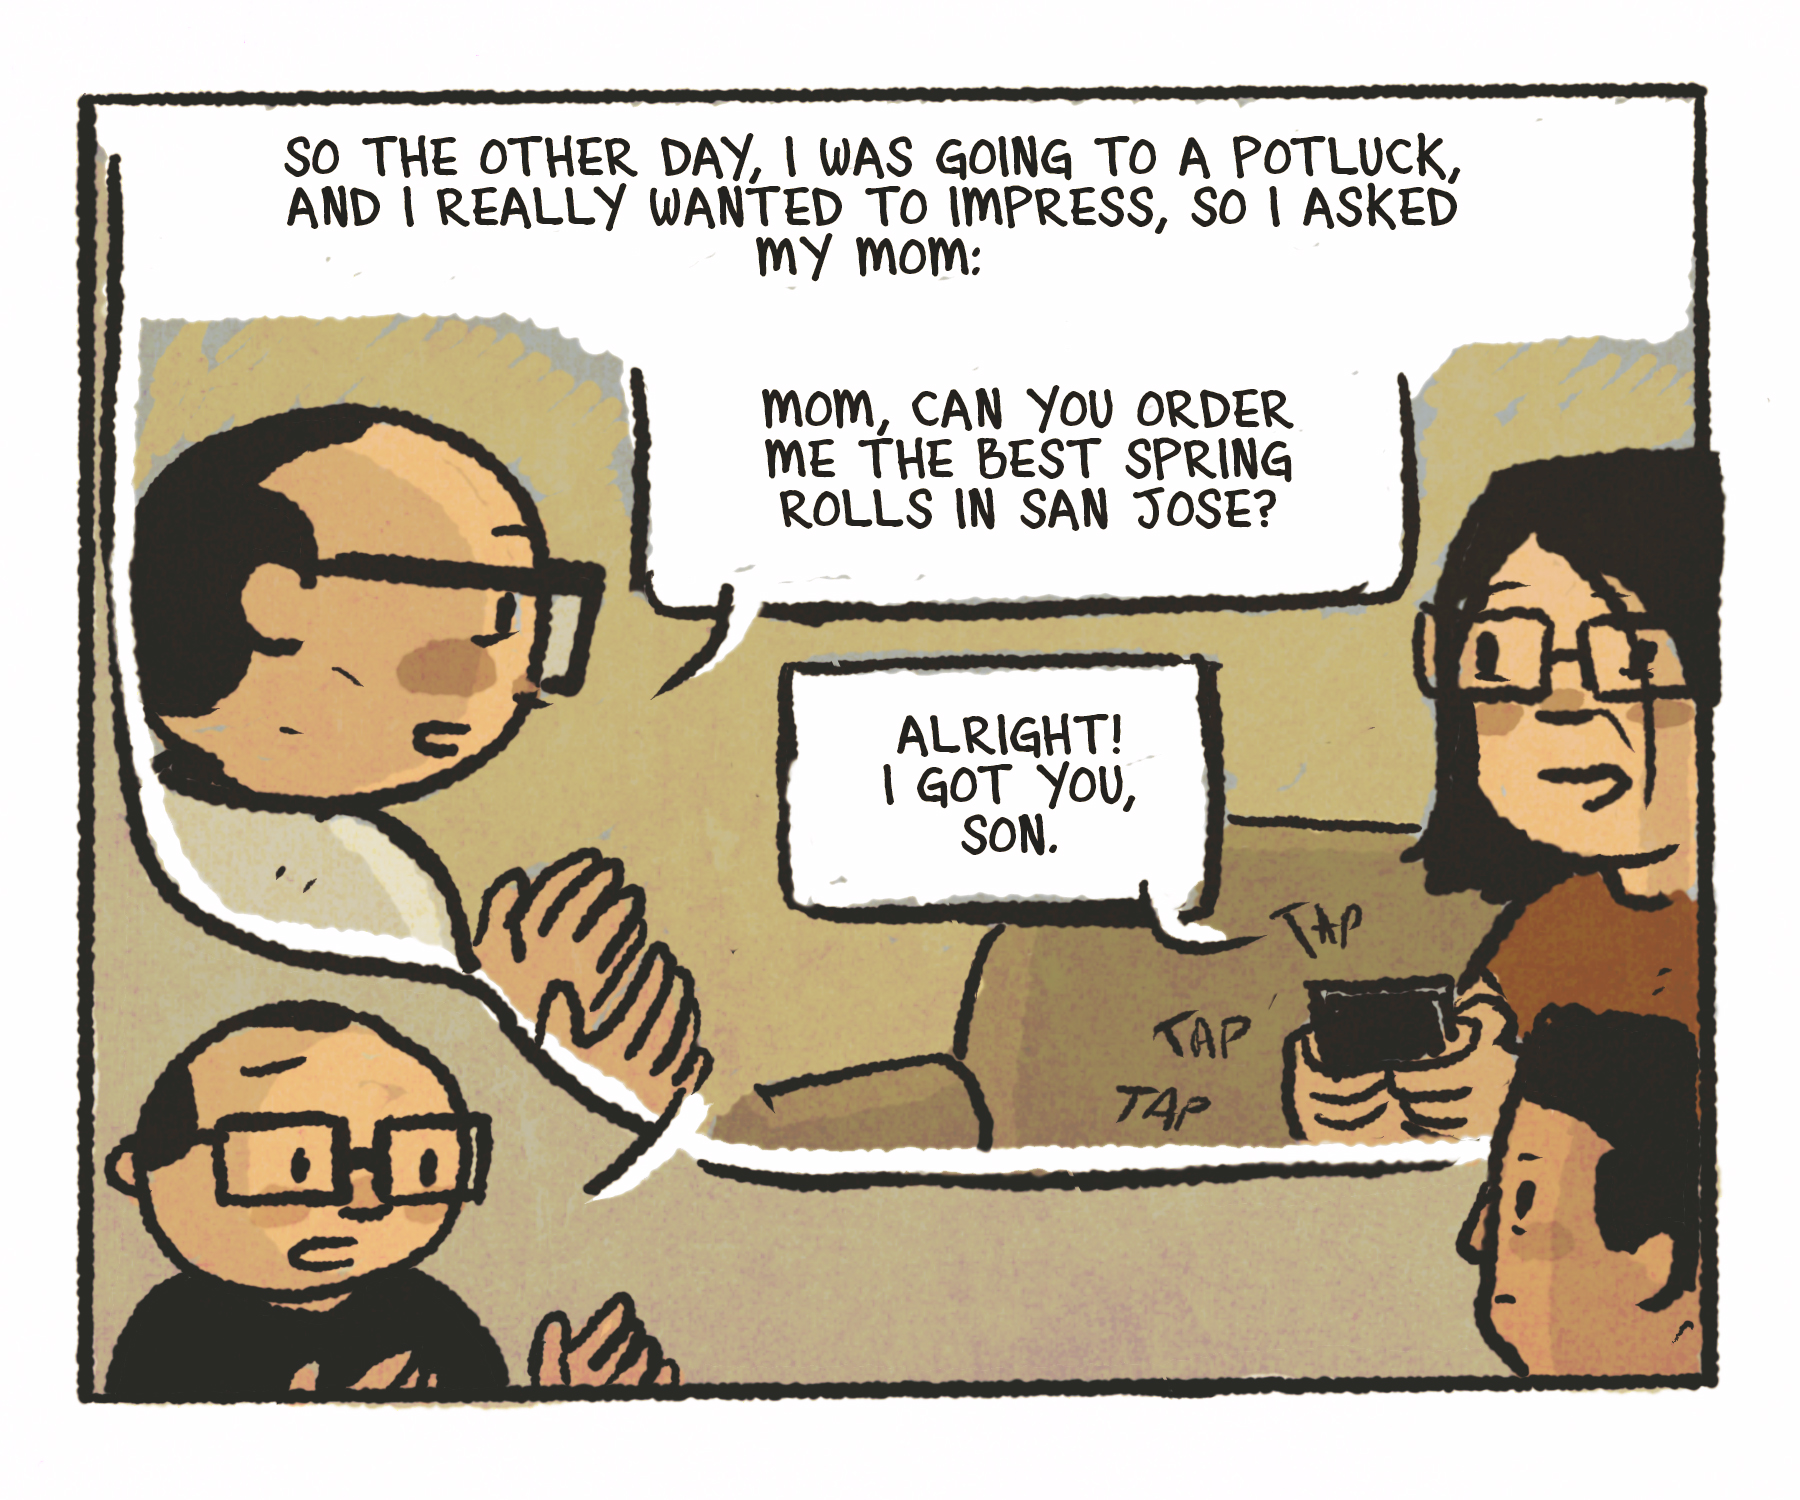 Comics panel: The man is describing a conversation with his mother; that scene appears above as a flashback. Speech bubbles: "So the other day I was going to a potluck and I really wanted to impress, so I asked my mom: 'Mom, can you order me the best spring rolls in San Jose?' Alright! I got you, son.'"